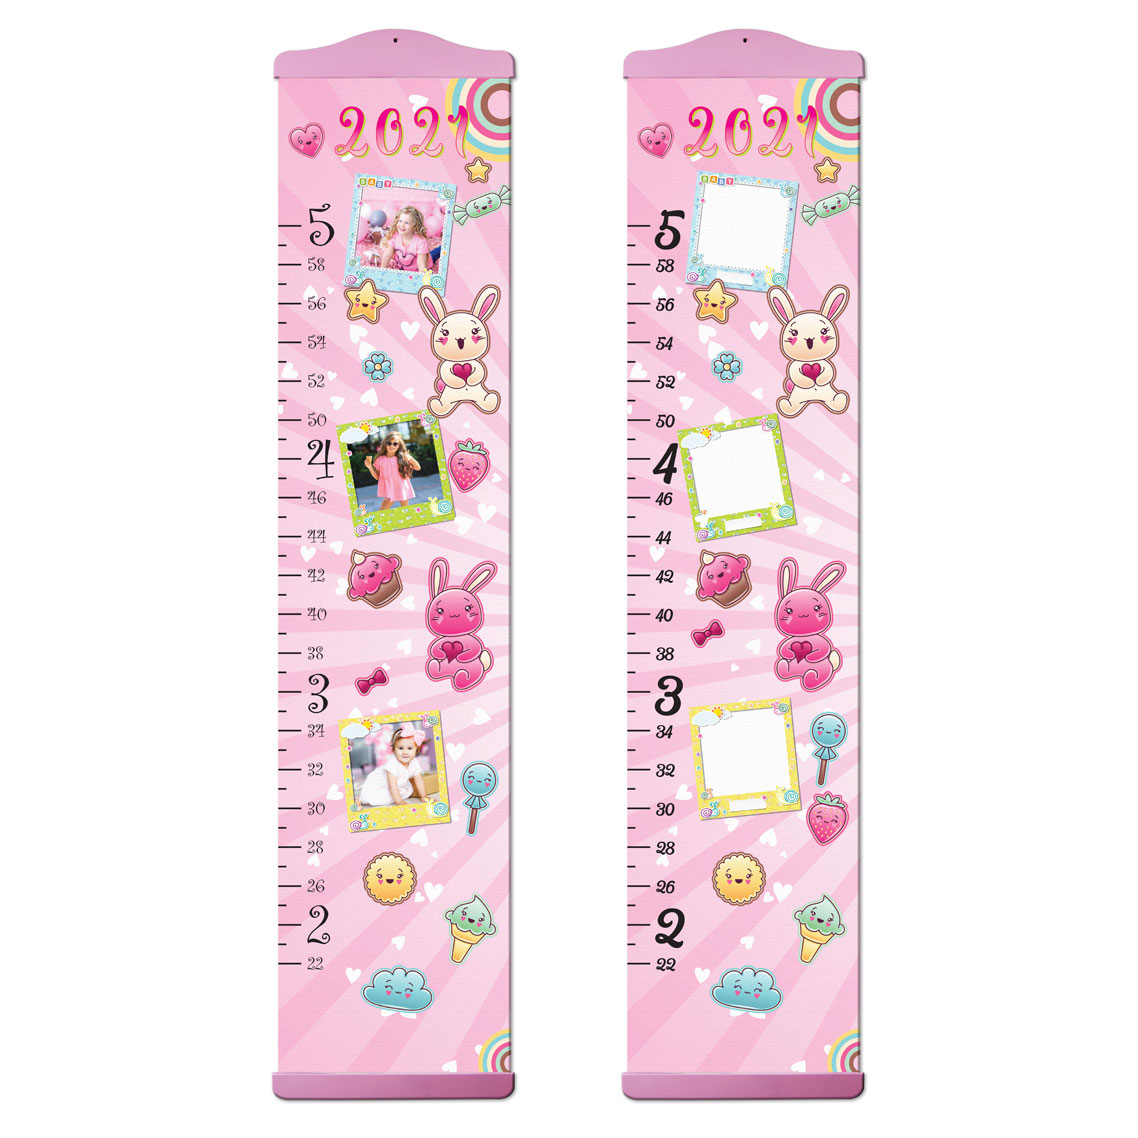 Pink Design Growth Chart with Personalized Photos